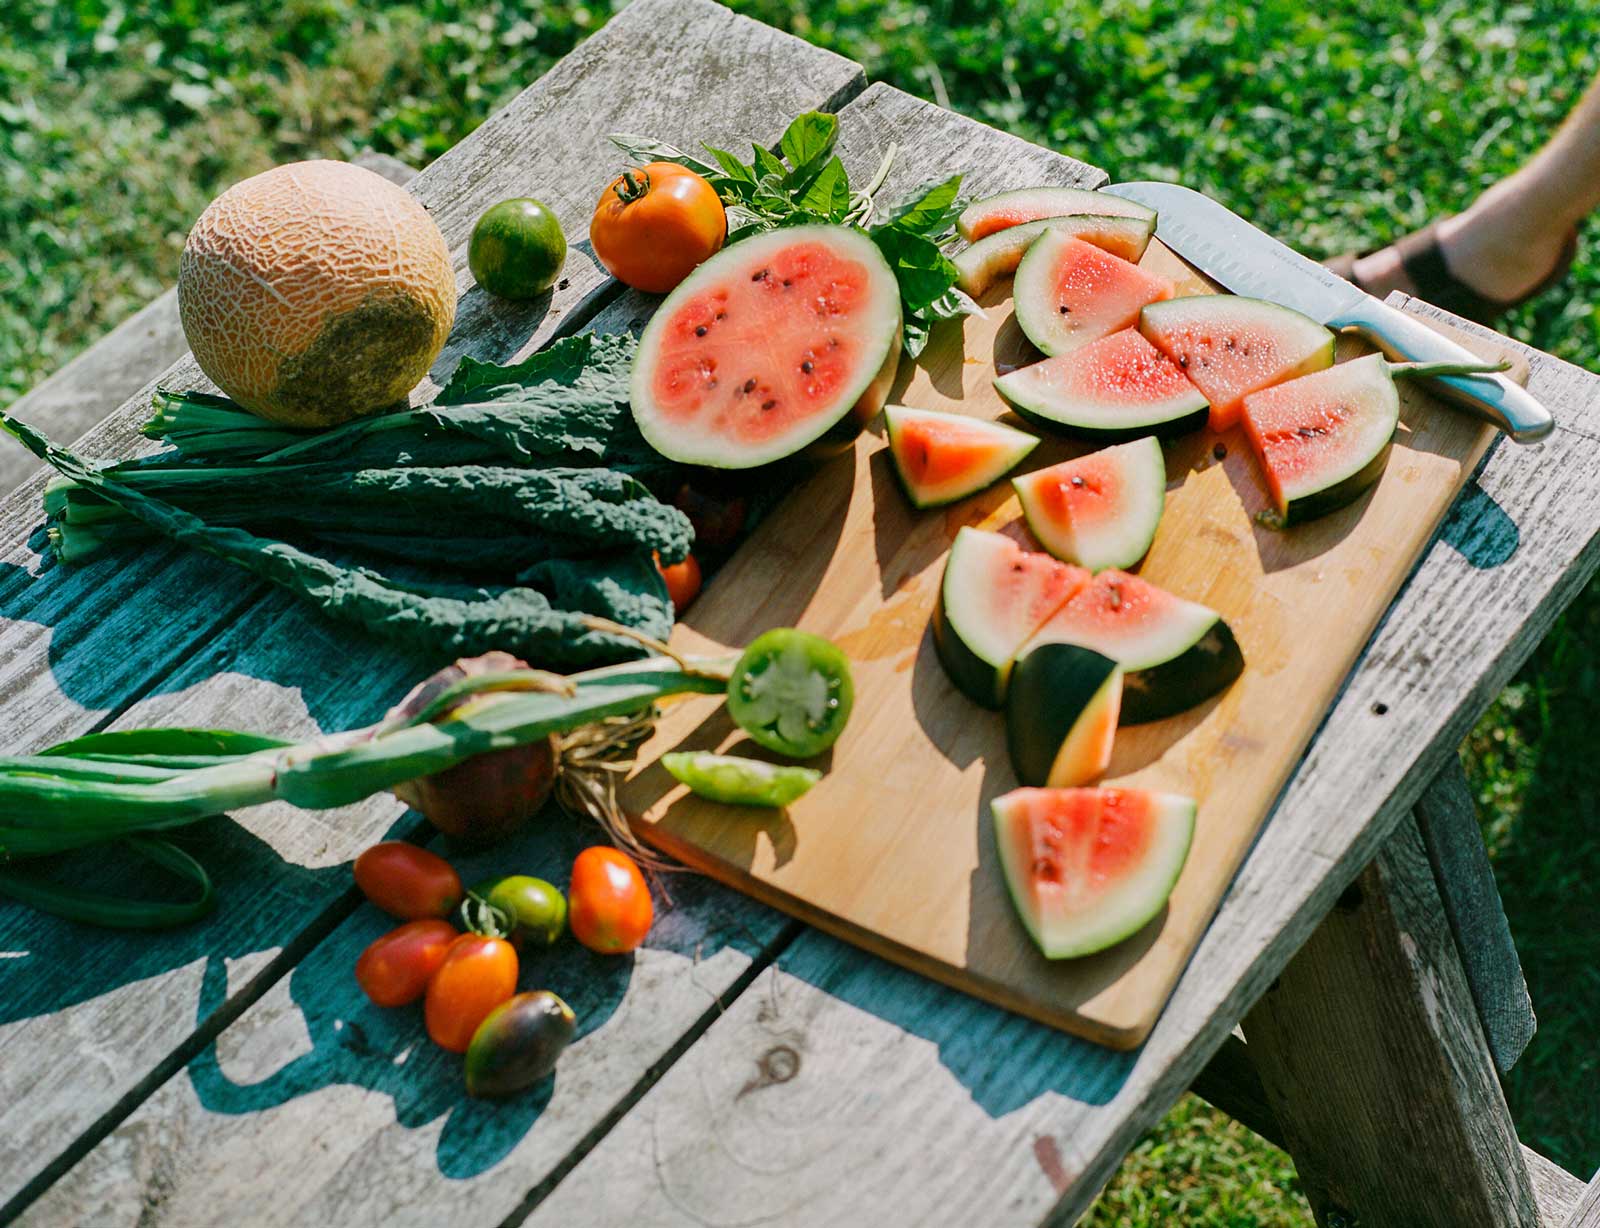 A still life of chopped and whole produce on a sunny picnic table, including watermelon, kale, and tomatoes.